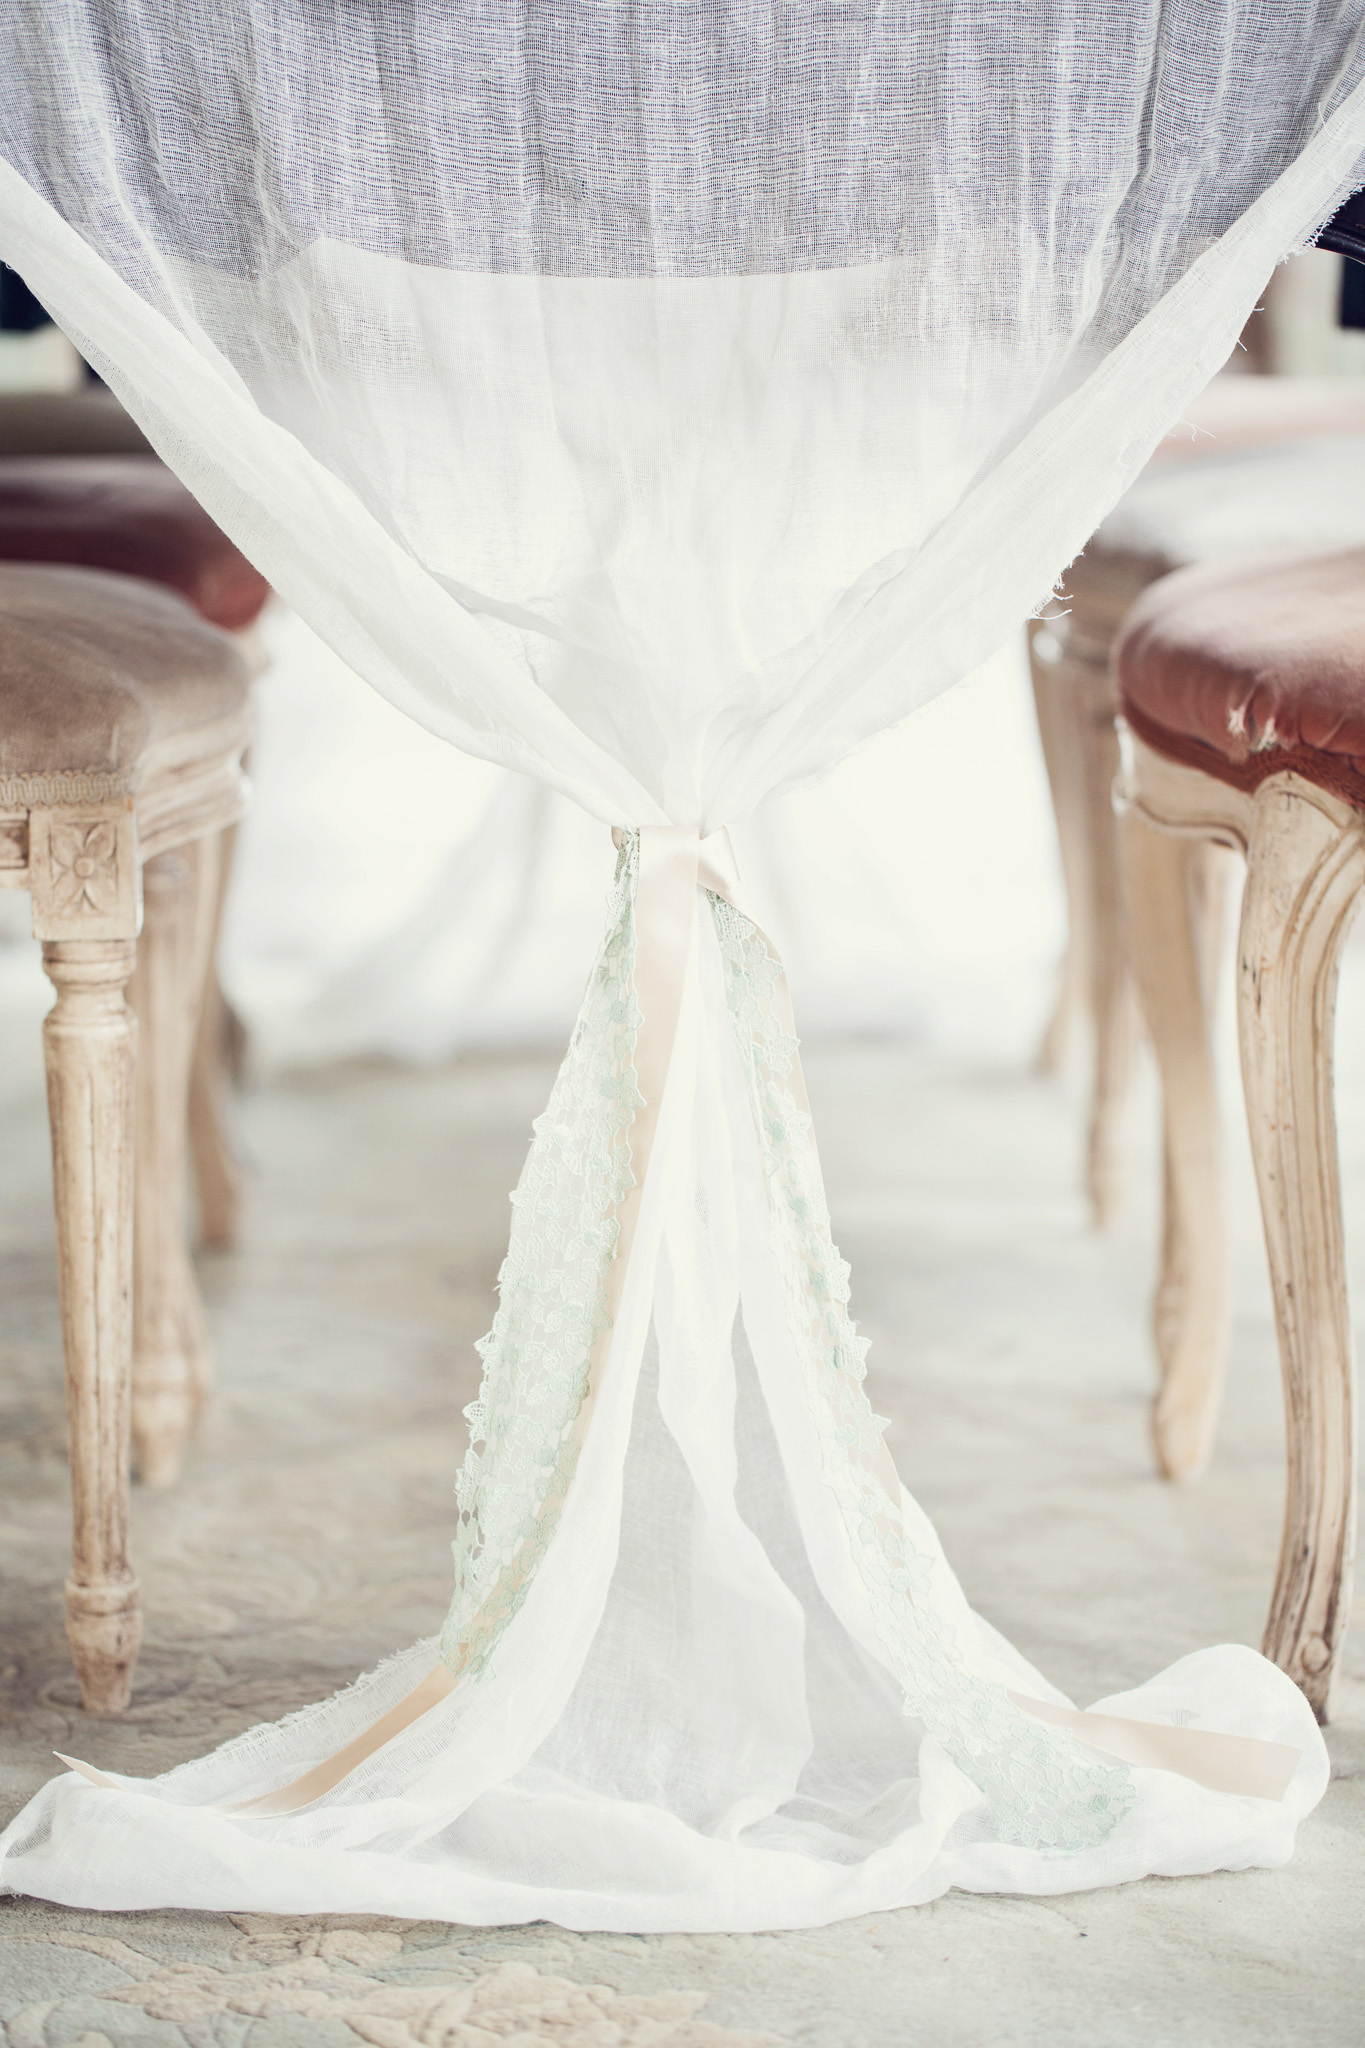 cheesecloth-table-runner-draping-off-table